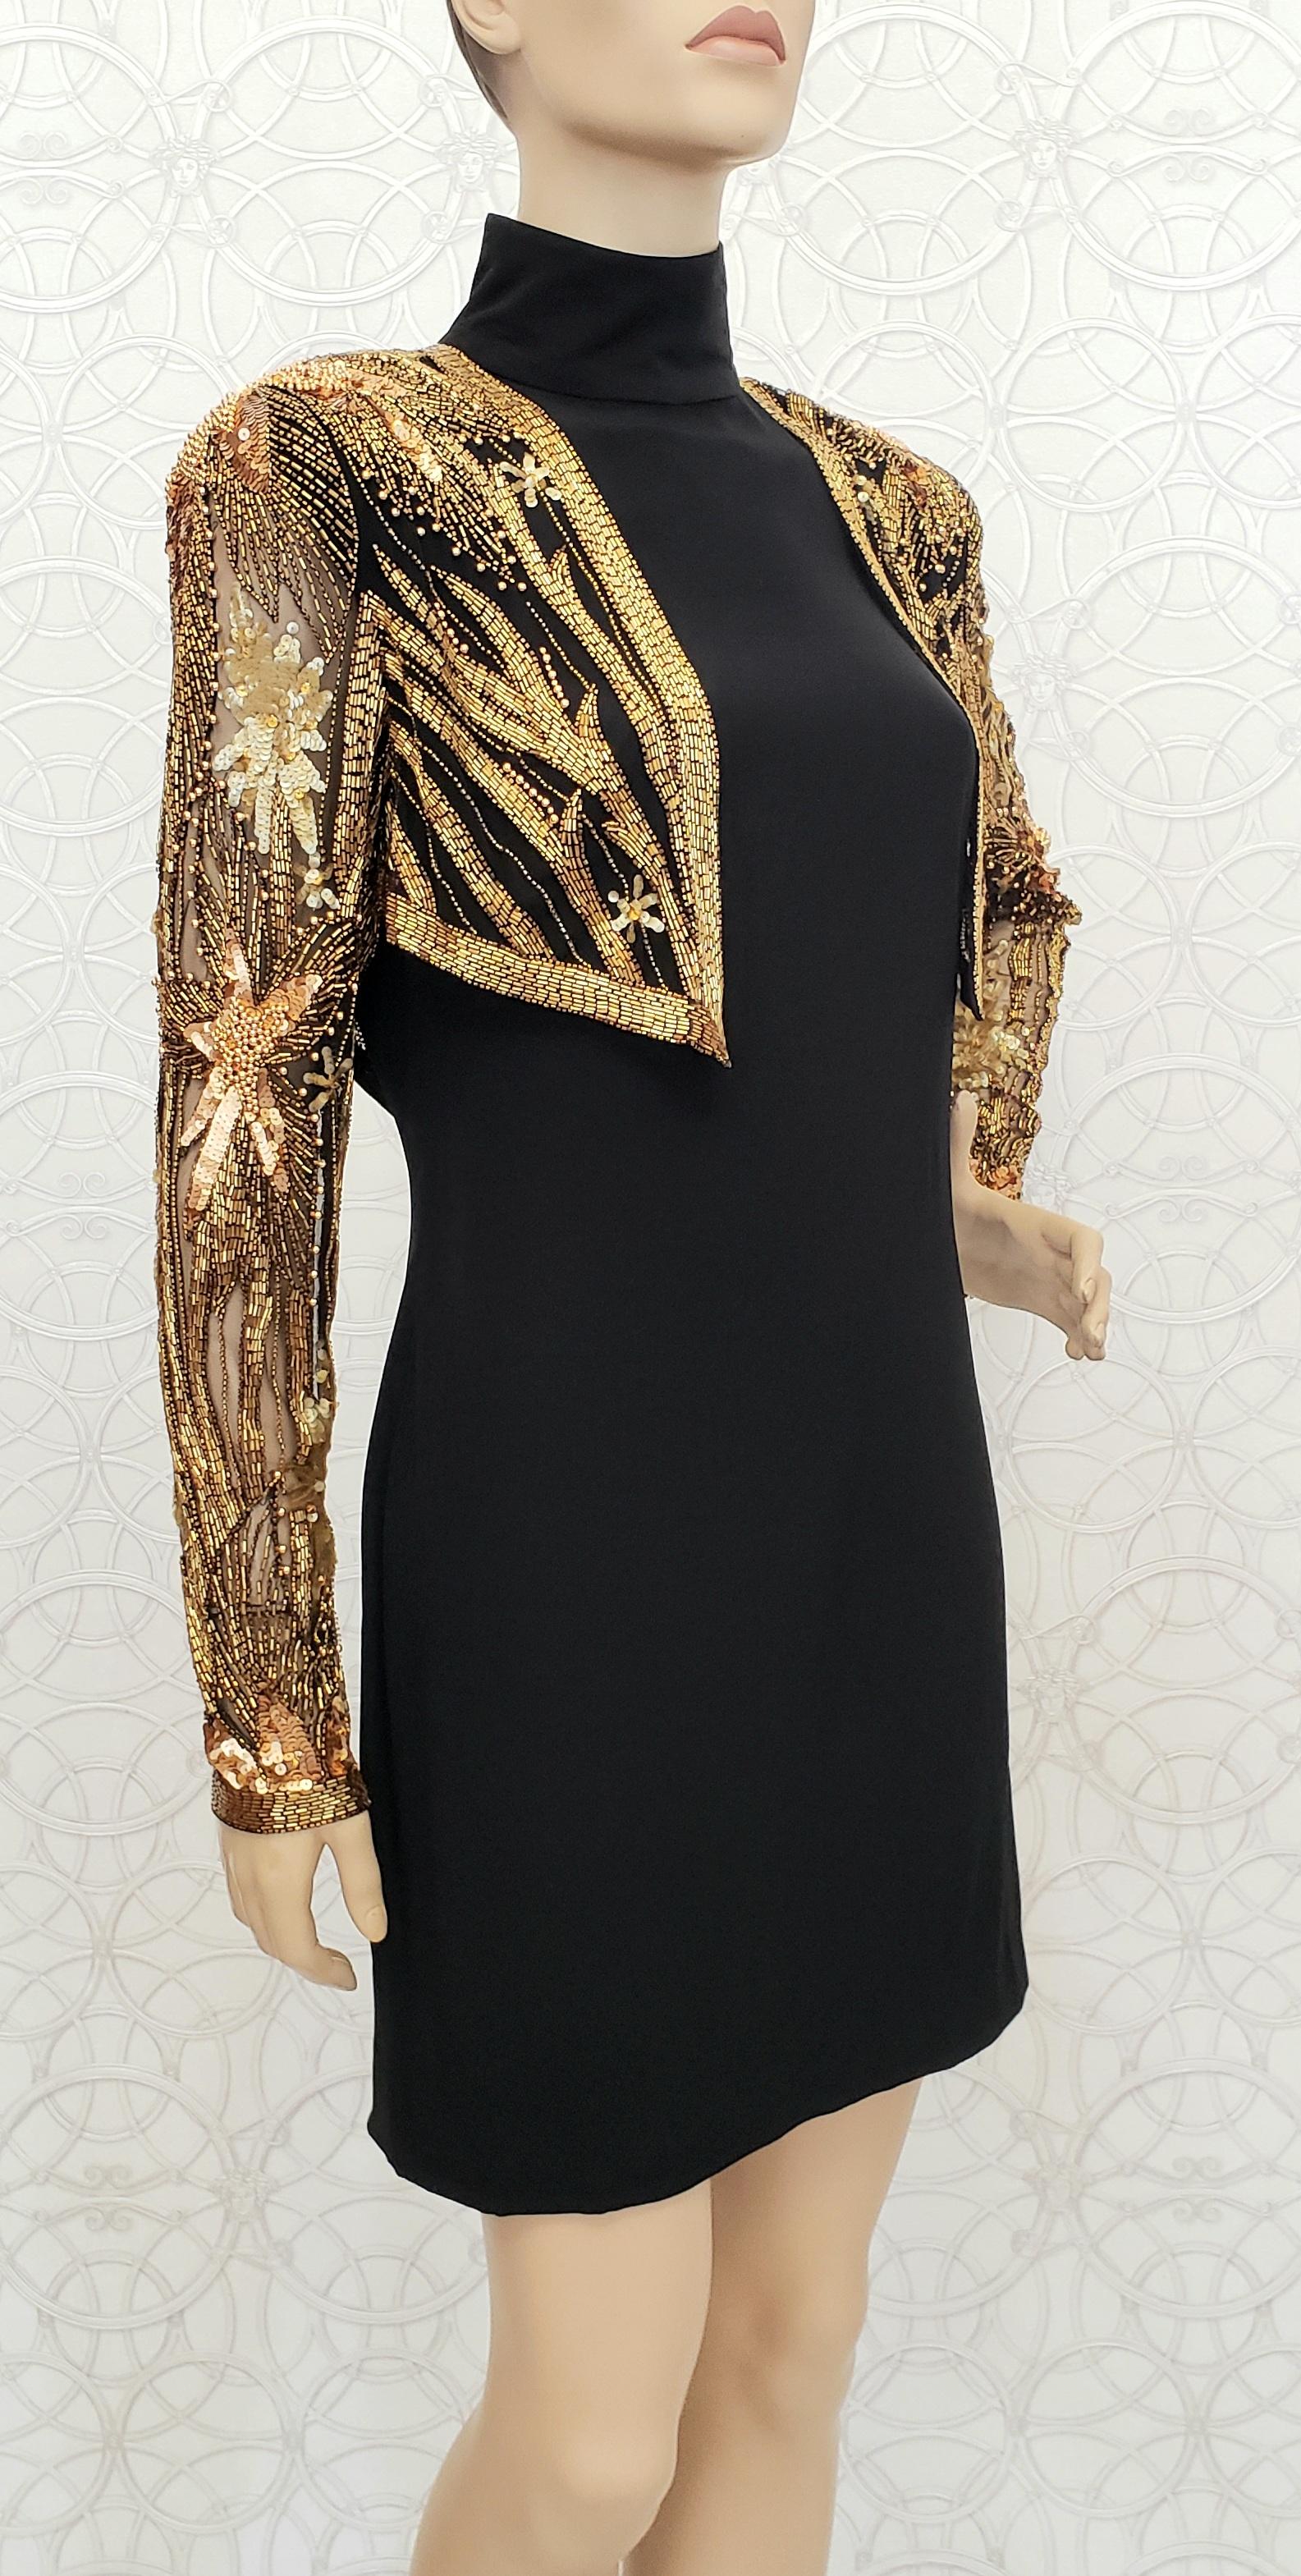 80-s Bob Mackie Beaded Bolero Dress

Beaded with sequins and glass beads. 
Turtleneck, zippers on the sleeves
Back zipper

Color: Black/Gold

Content: 
Bodice: 100% Nylon
Bottom : 66% Acetate, 34% Rayon

Size US 10

Shoulder to shoulder 17